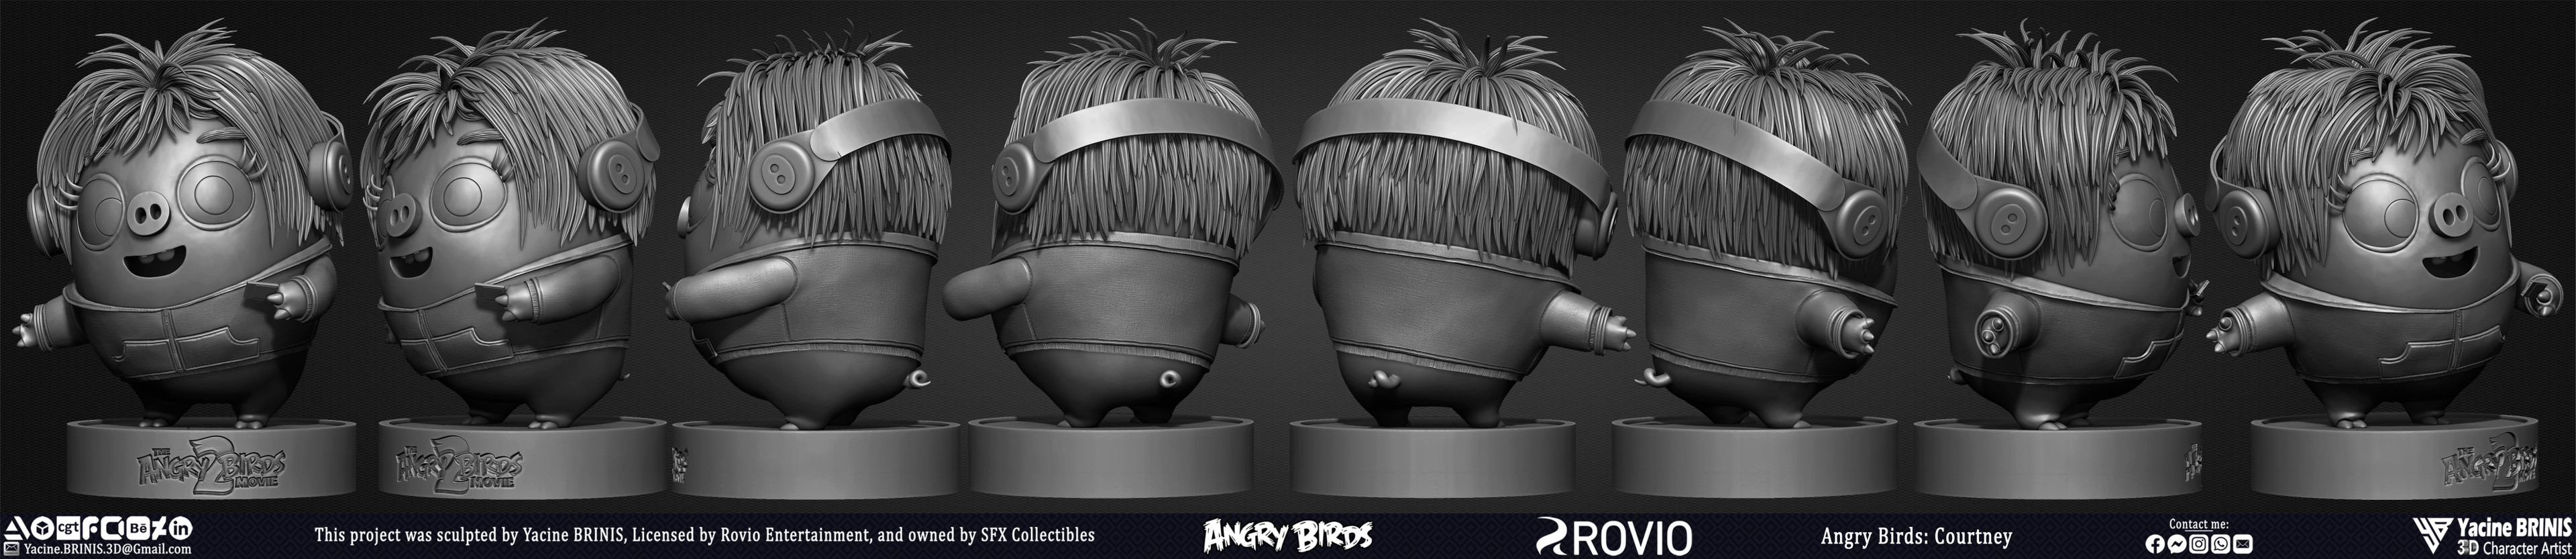 Courtney Angry Birds Mouvie 2 Rovio Entertainment 3D Model sculpted By Yacine BRINIS 002